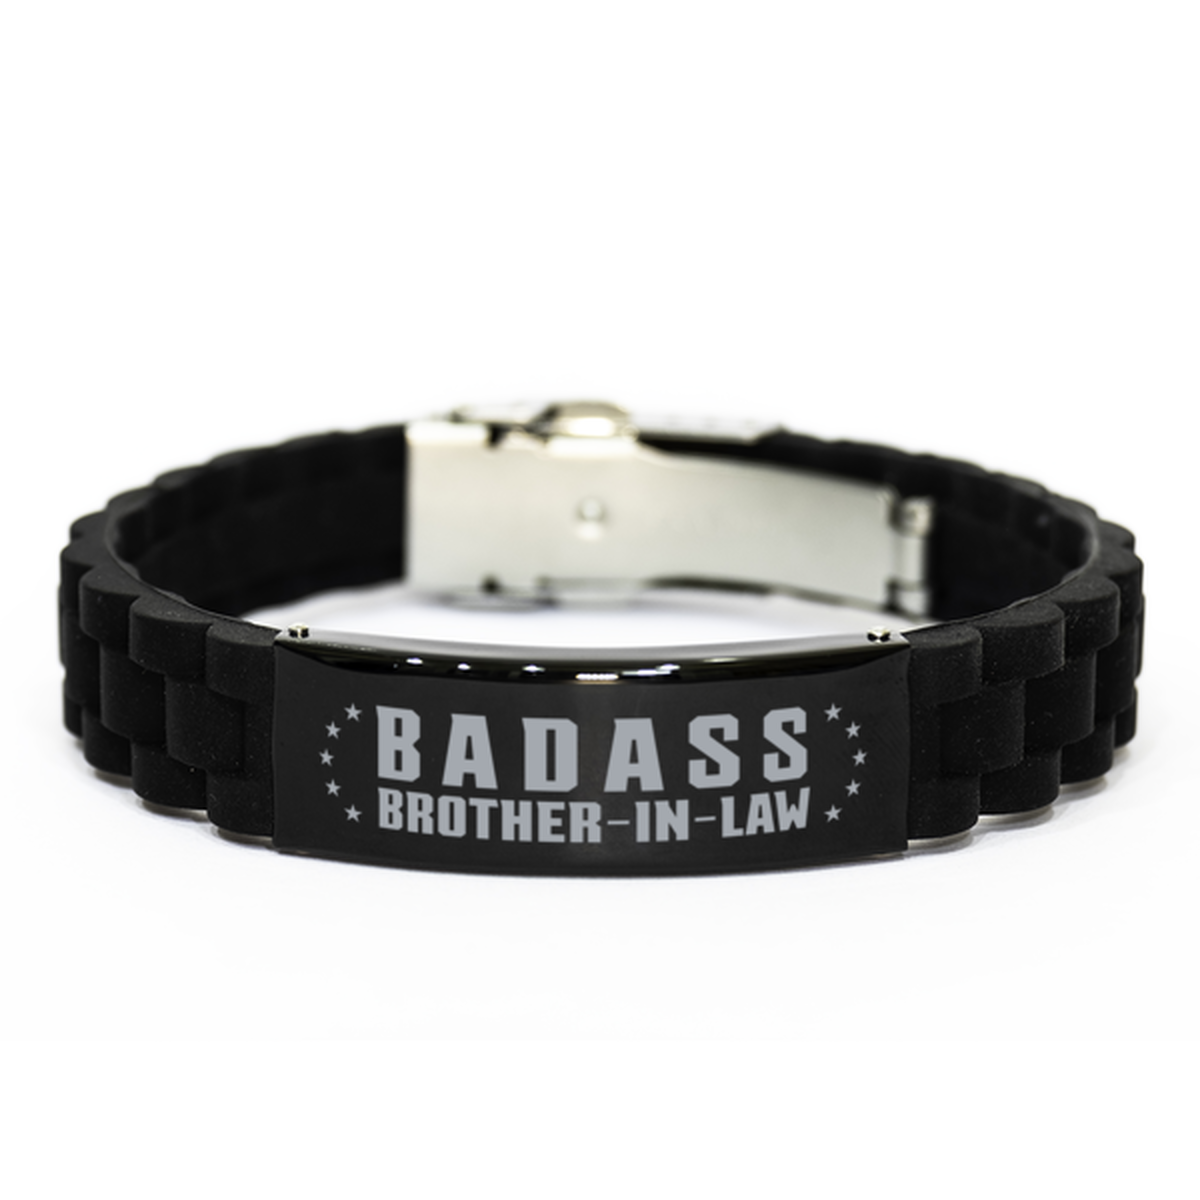 Brother-in-law Black Bracelet, Badass Brother-in-law, Funny Family Gifts For Brother-in-law From Brother Sister